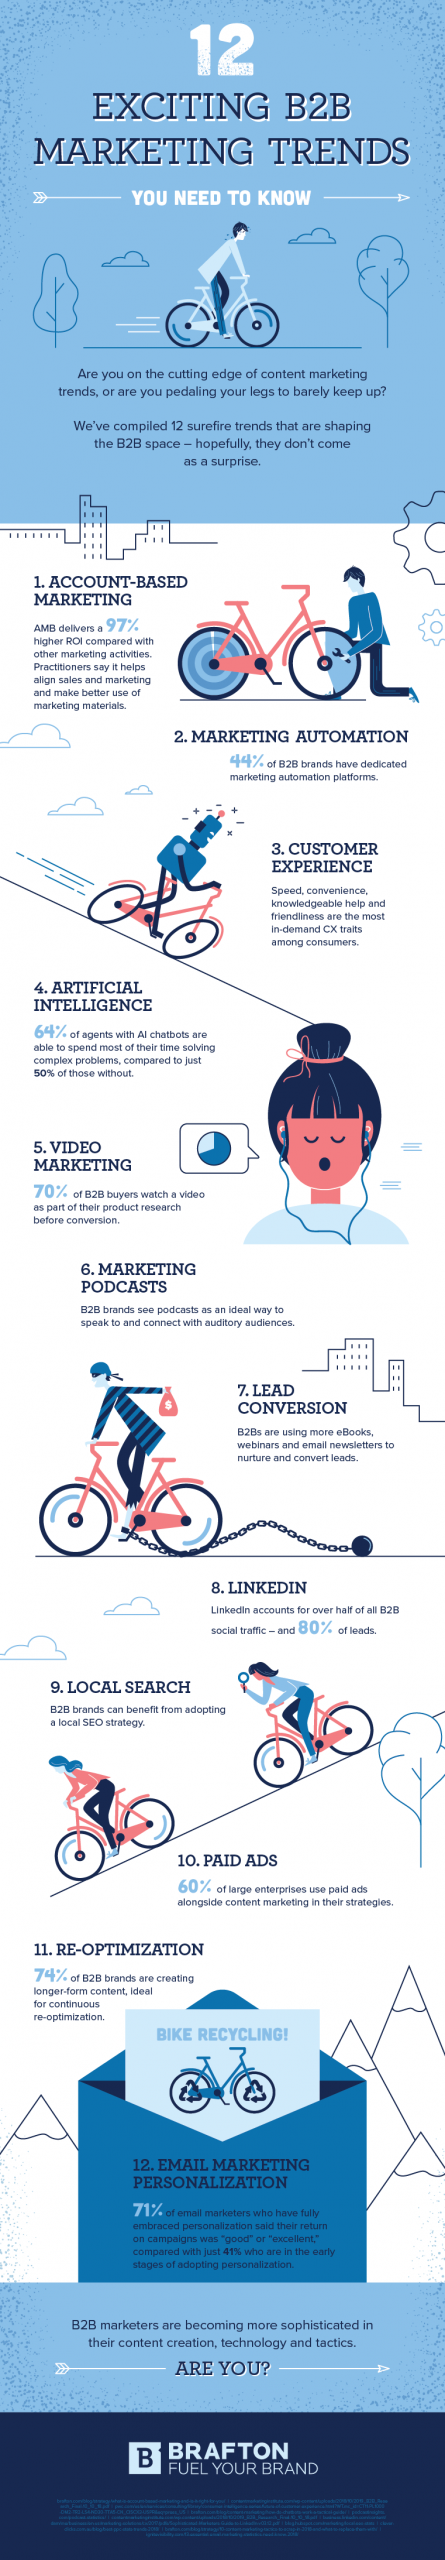 12 exciting 2B2 marketing trends you need to know Infographic